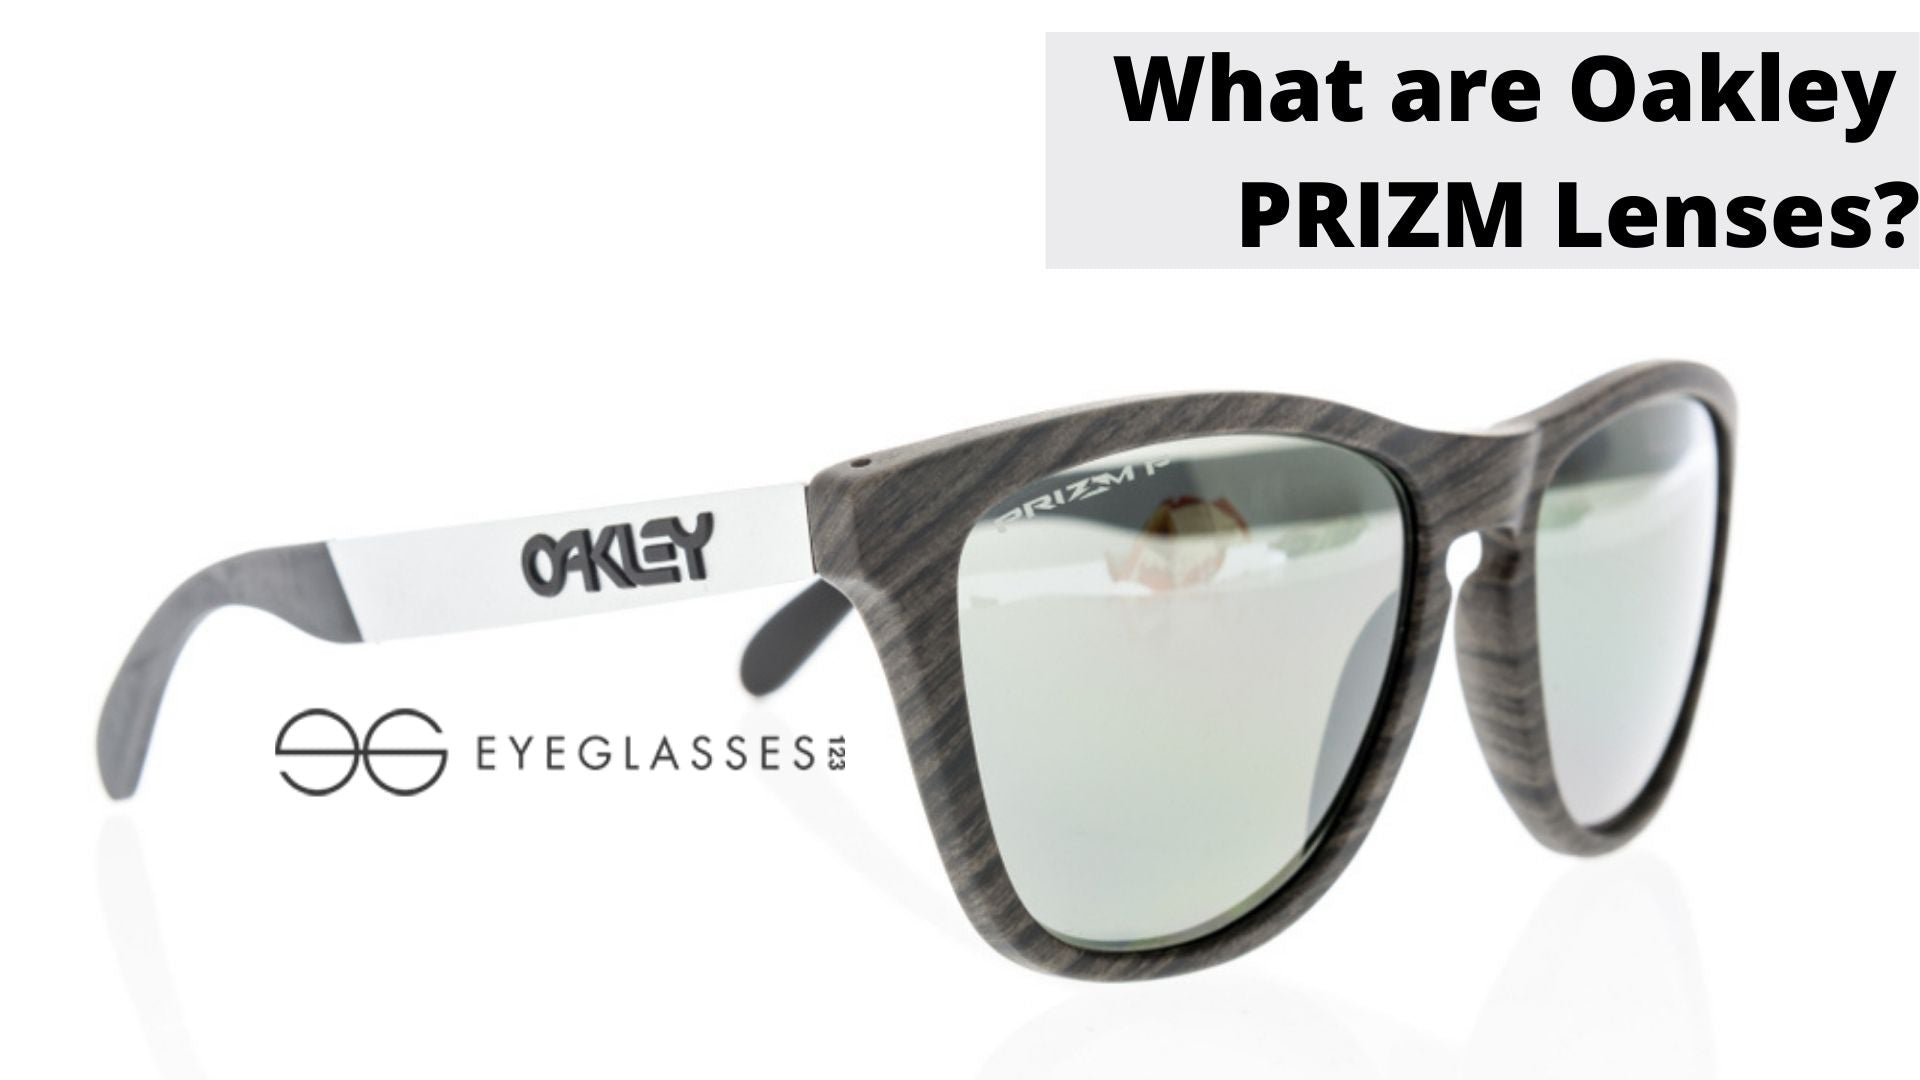 What are Oakley PRIZM Lenses?